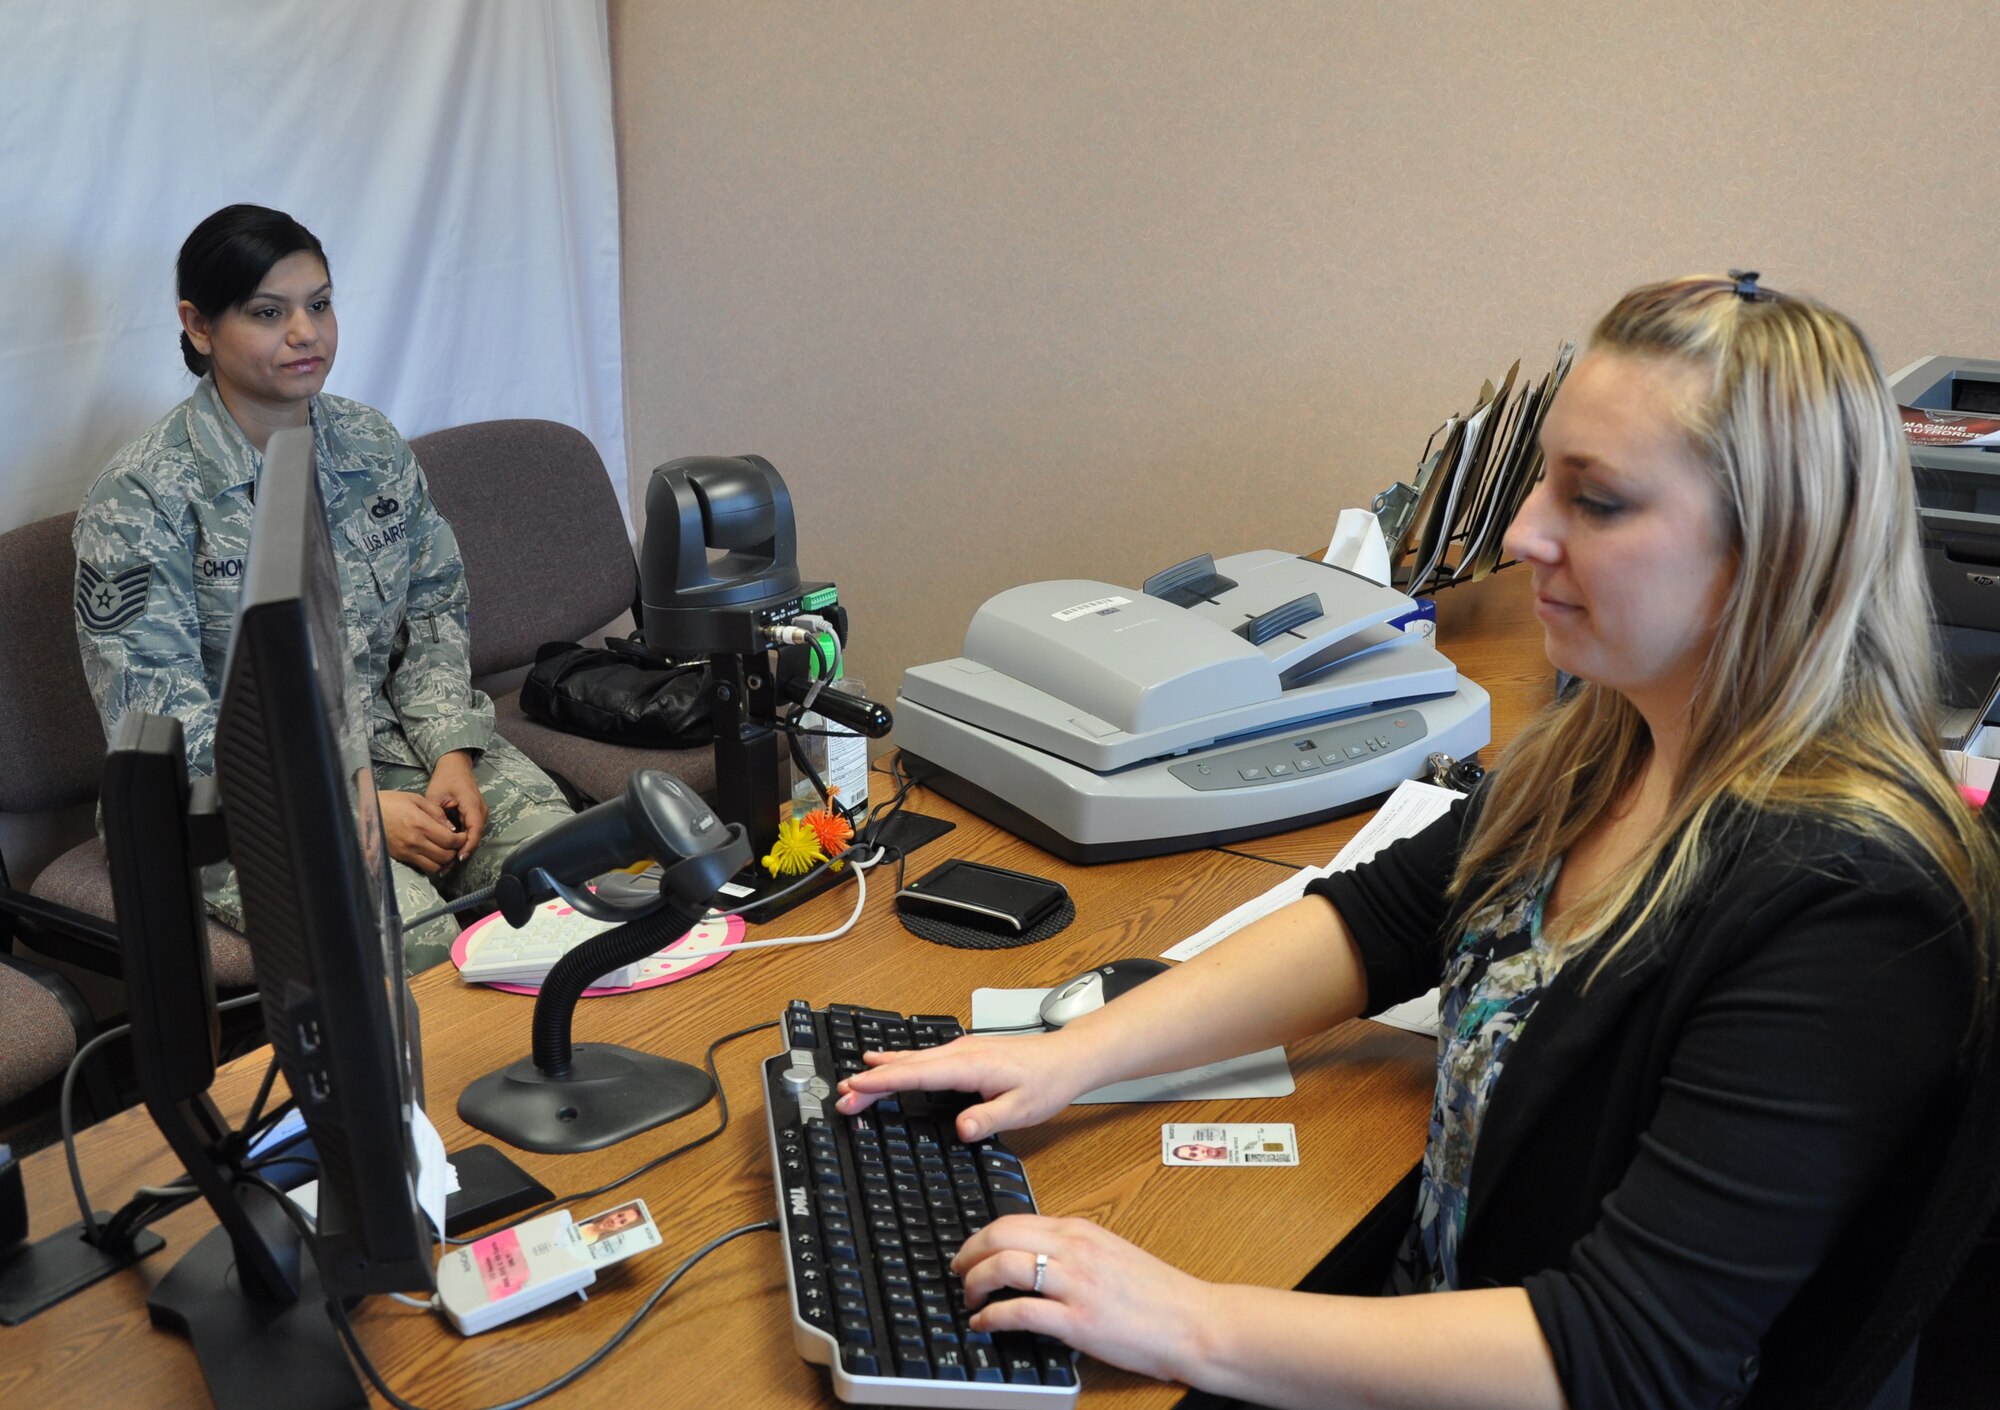 Shannon J. Geronimi, 9th Support Division Administrative Support Flight human resource assistant, helps Tech. Sgt. Cristina Chomina, 9th Security Forces Squadron,  update her common access card at Beale Air Force Base, Calif., Jan. 5, 2012. The ASF has improved customer service by reducing the number of steps it takes to produce an ID. (U.S. Air Force photo by Staff Sgt. Robert M. Trujillo)